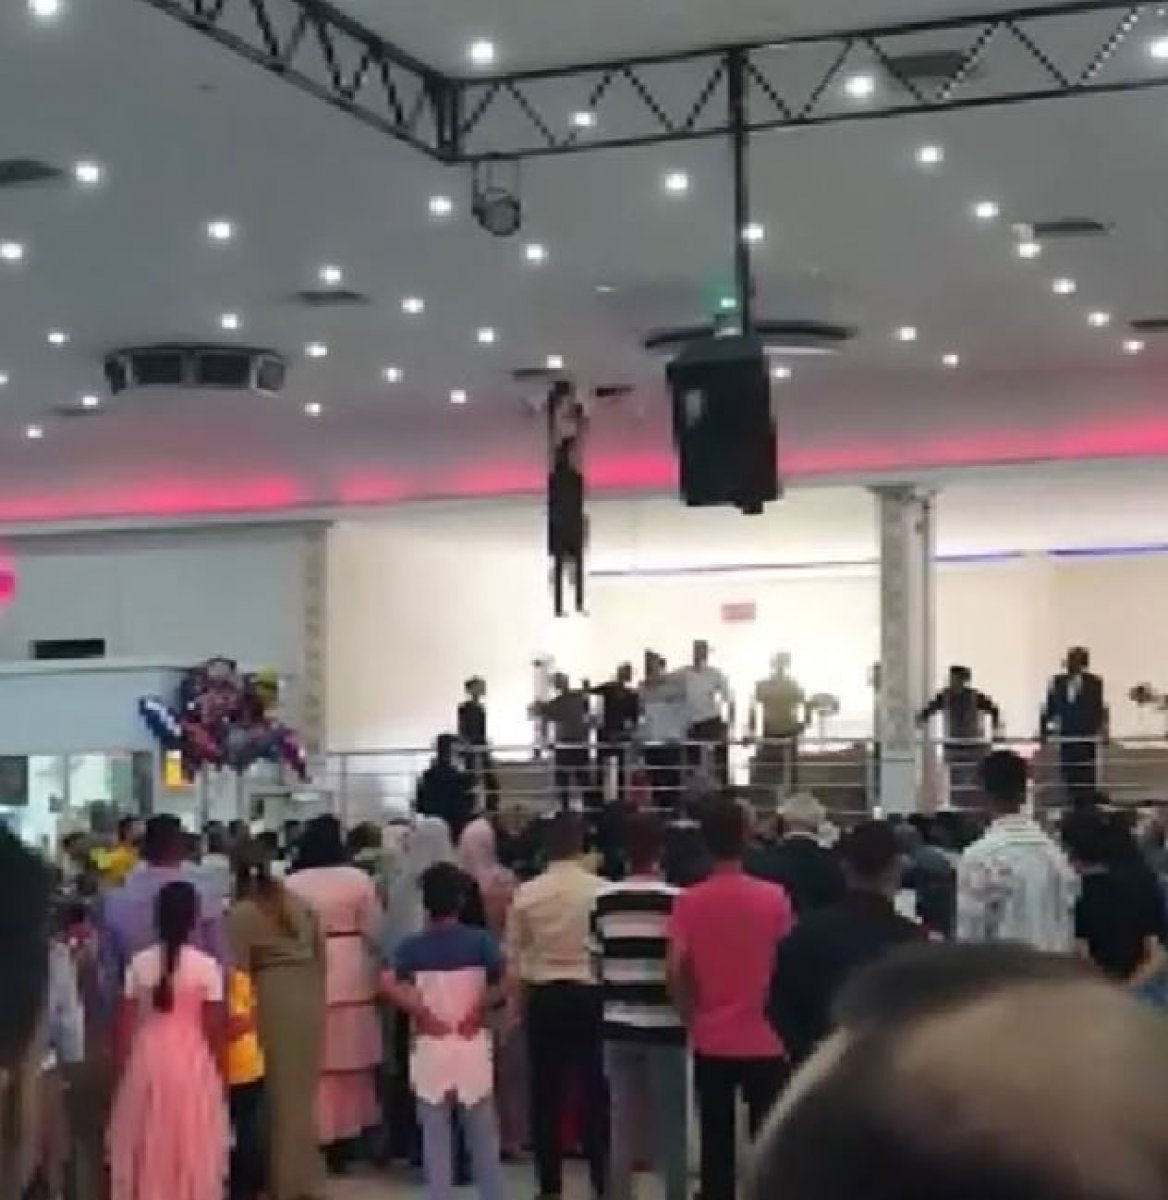 In Gaziantep, the worker fell from the ventilation gap in the middle of the wedding #1